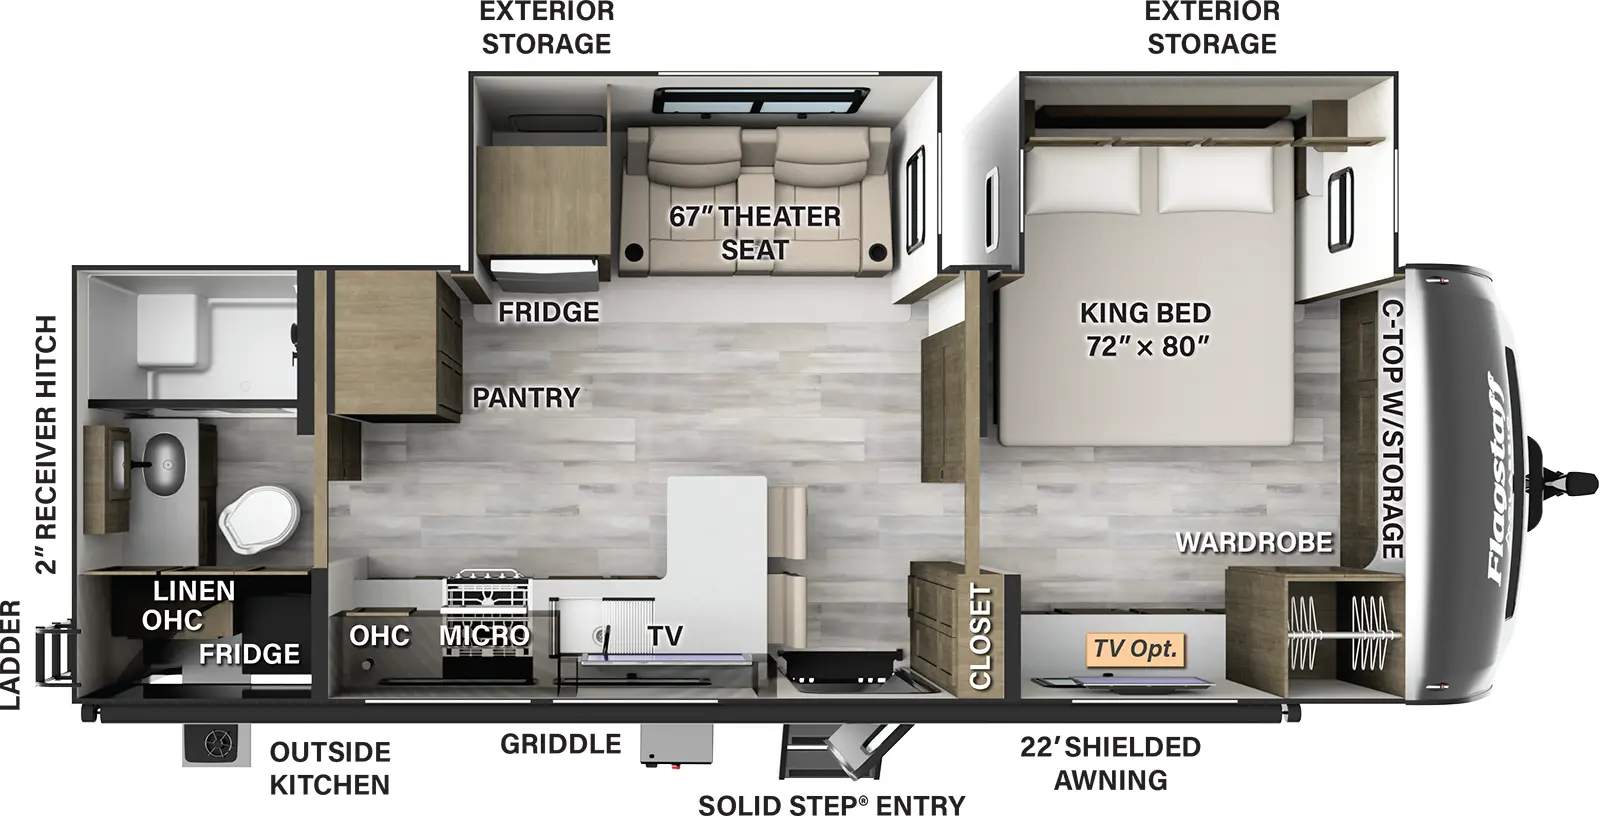 The 826KBS has two slideouts and one entry. Exterior features 22 foot shielded awning, solid entry step, griddle, outside kitchen with refrigerator, exterior storage, rear ladder, and 2 inch receiver hitch. Interior layout front to back: front countertop with storage, off-door side king bed slideout, door side wardrobe and optional TV; off-door side slideout with theater seat and refrigerator, and a pantry; door side closet, entry, peninsula kitchen counter with seating that wraps to door side with sink, microwave, cooktop and overhead cabinet; rear full bathroom with linen closet.